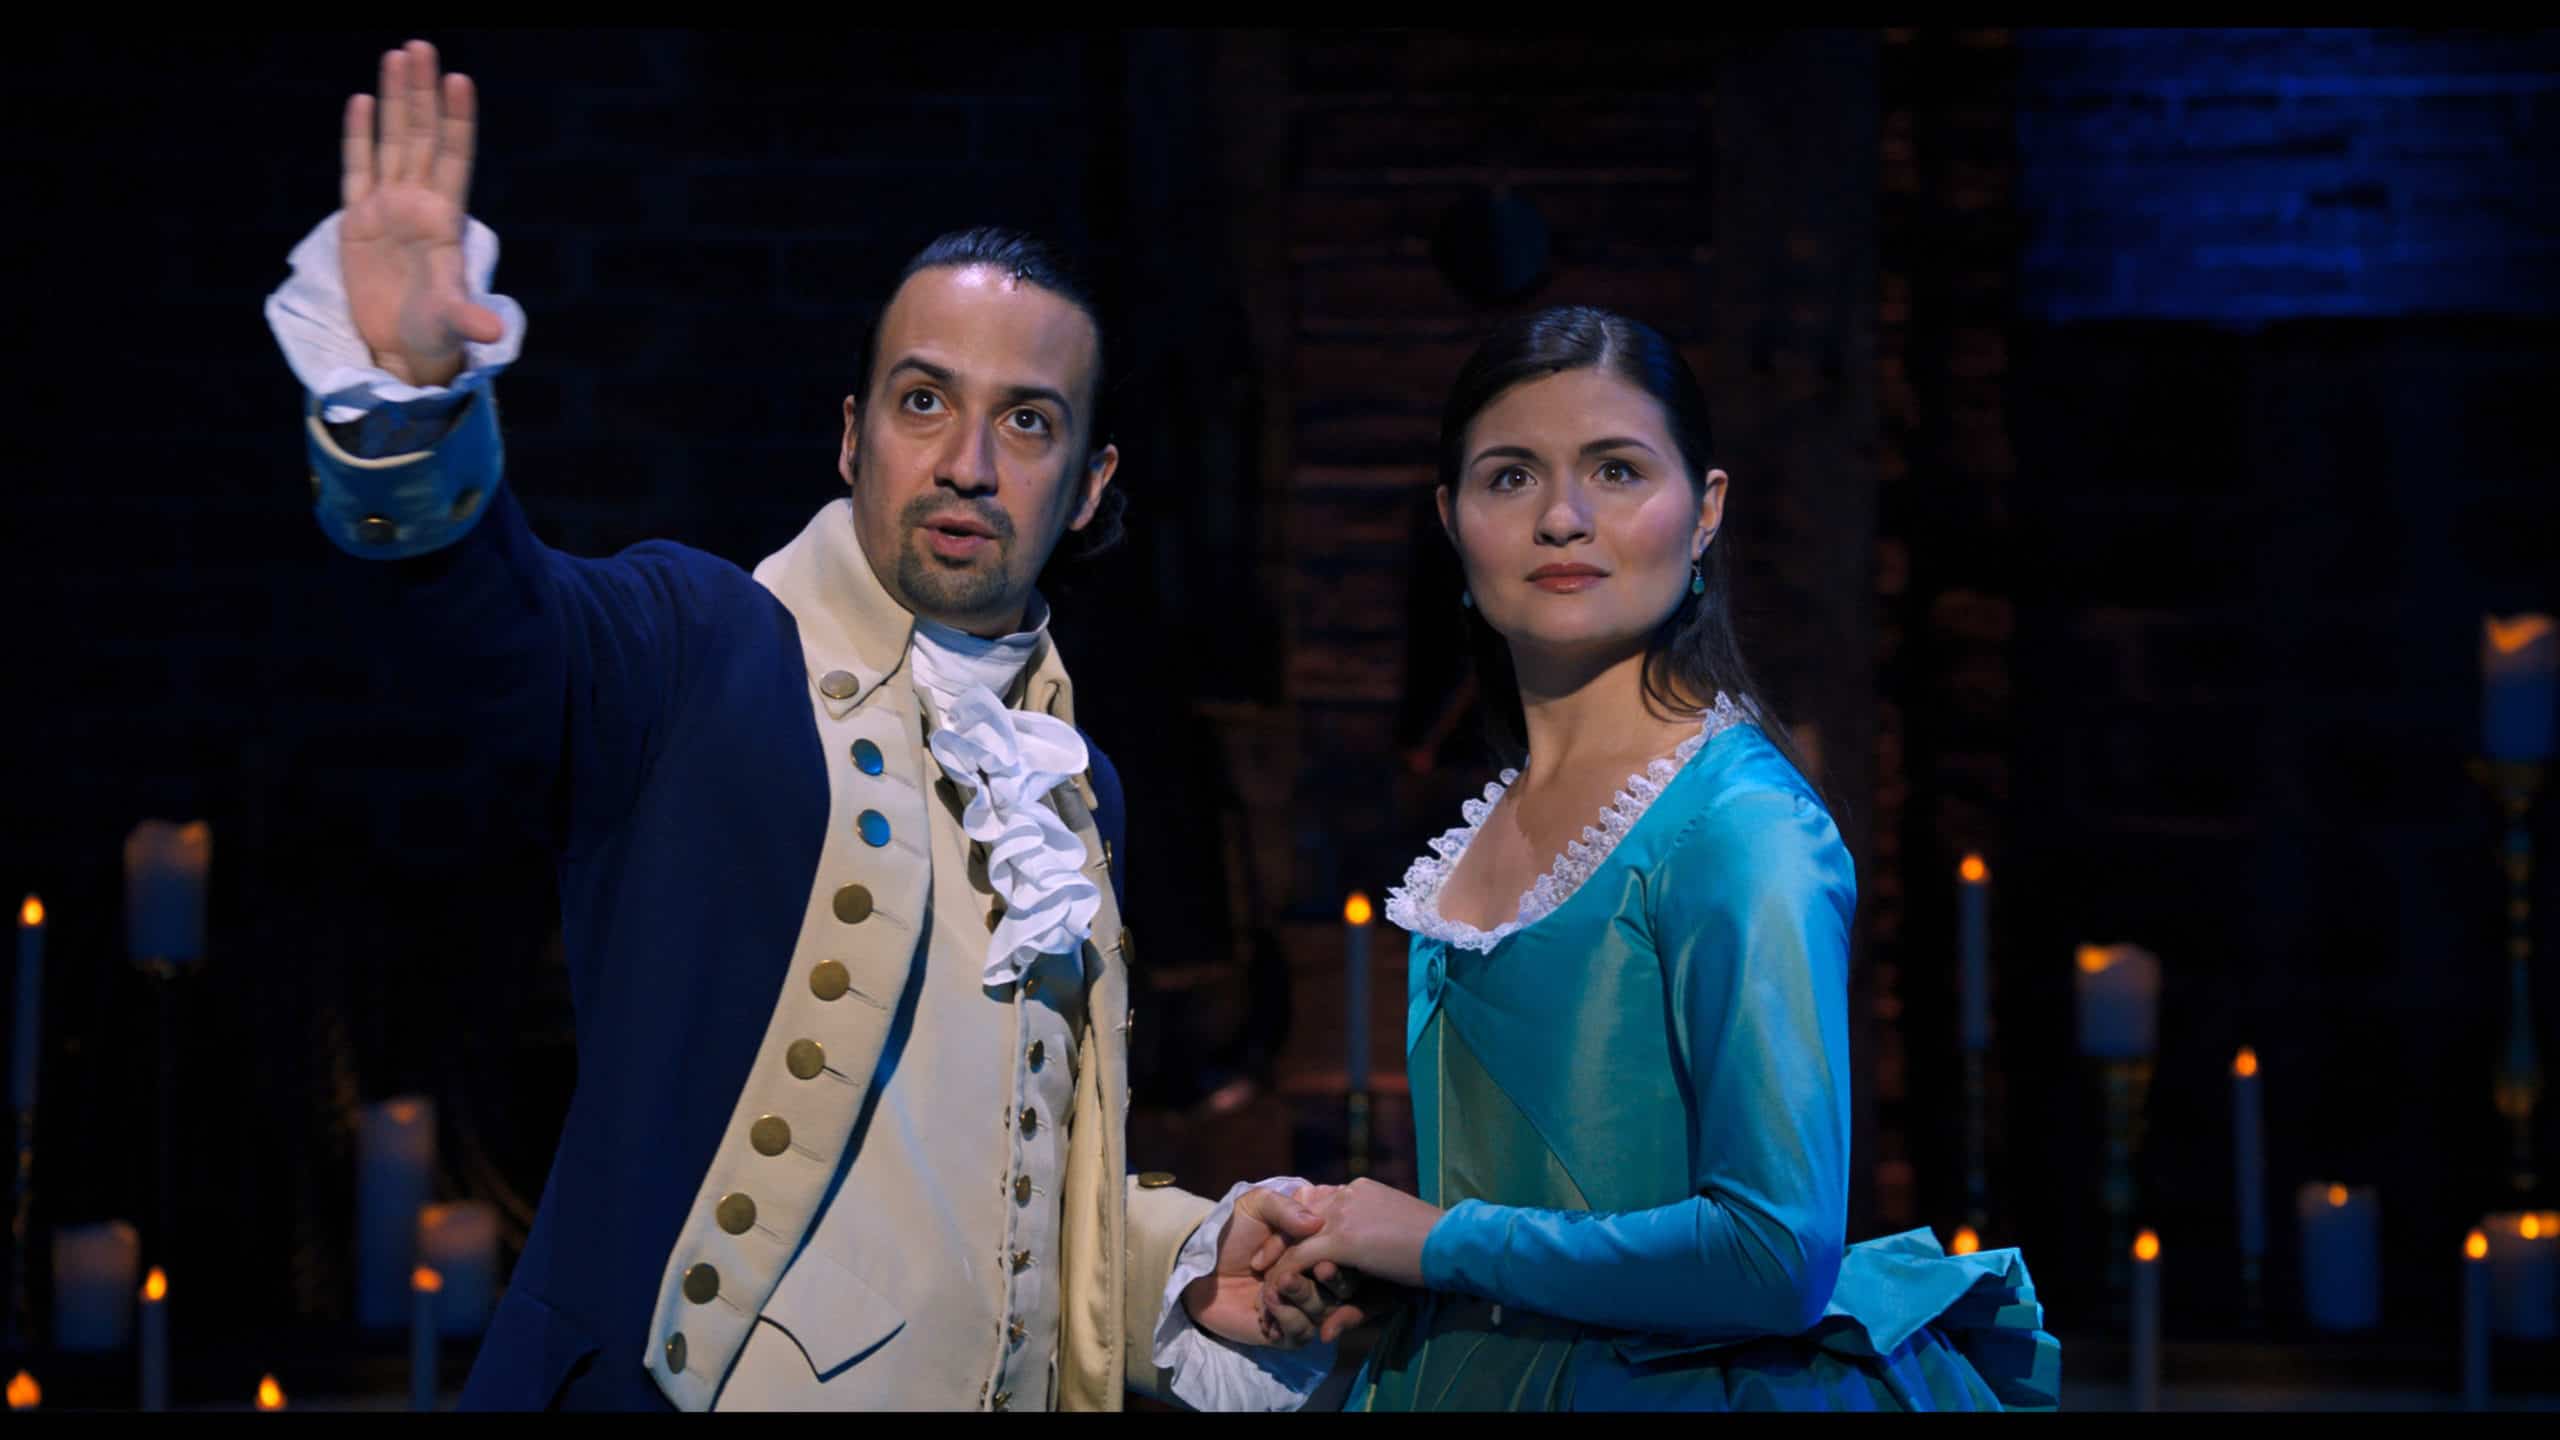 Top Hamilton quotes to inspire you every day (and celebrate it’s on Disney+)